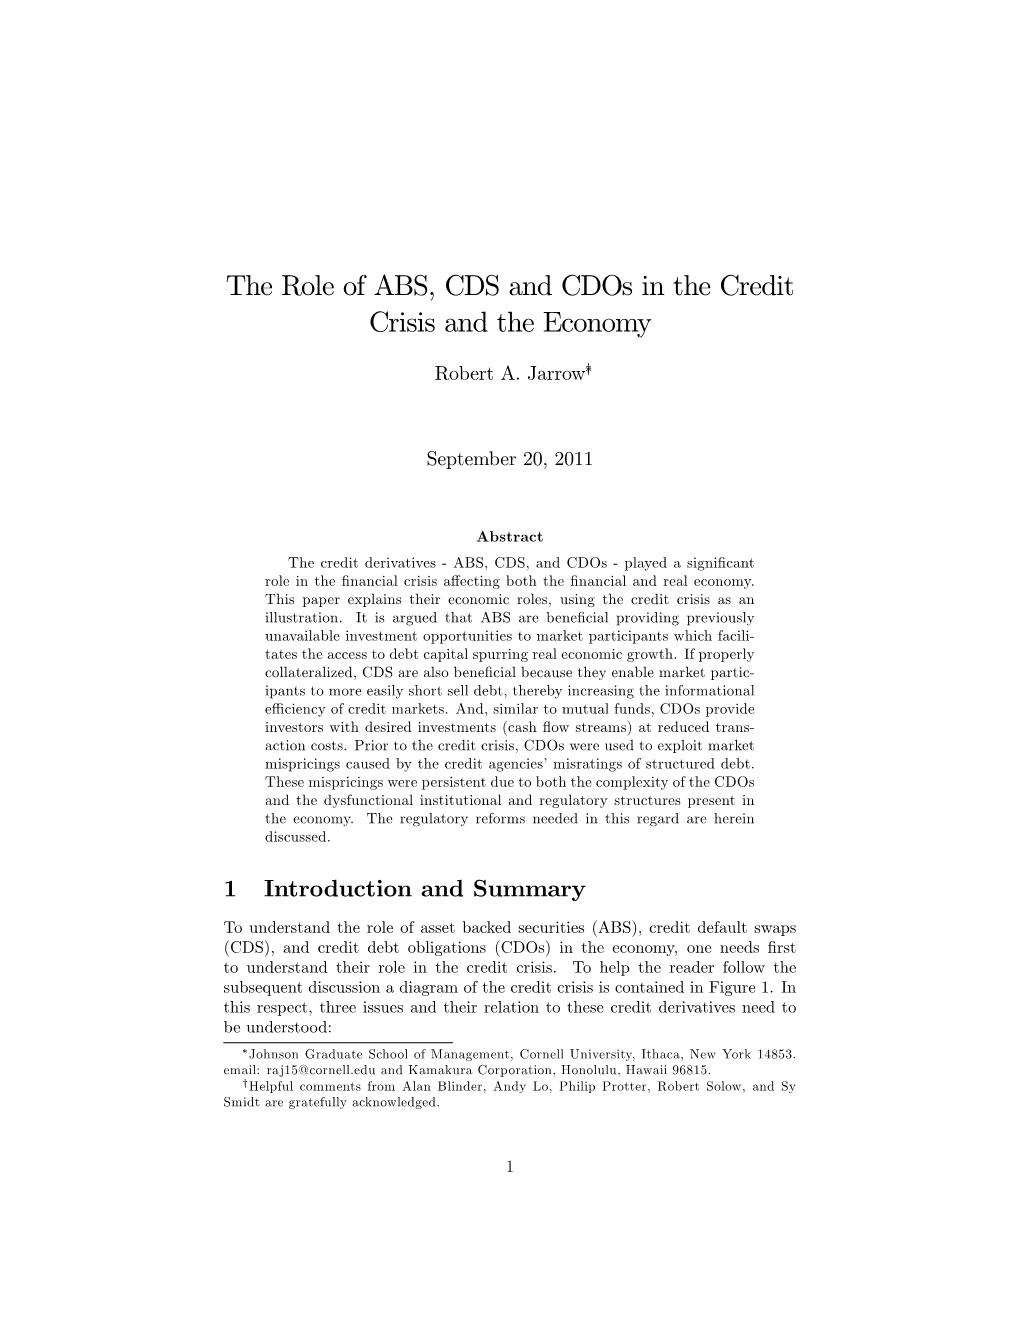 The Role of ABS, CDS and Cdos in the Credit Crisis and the Economy